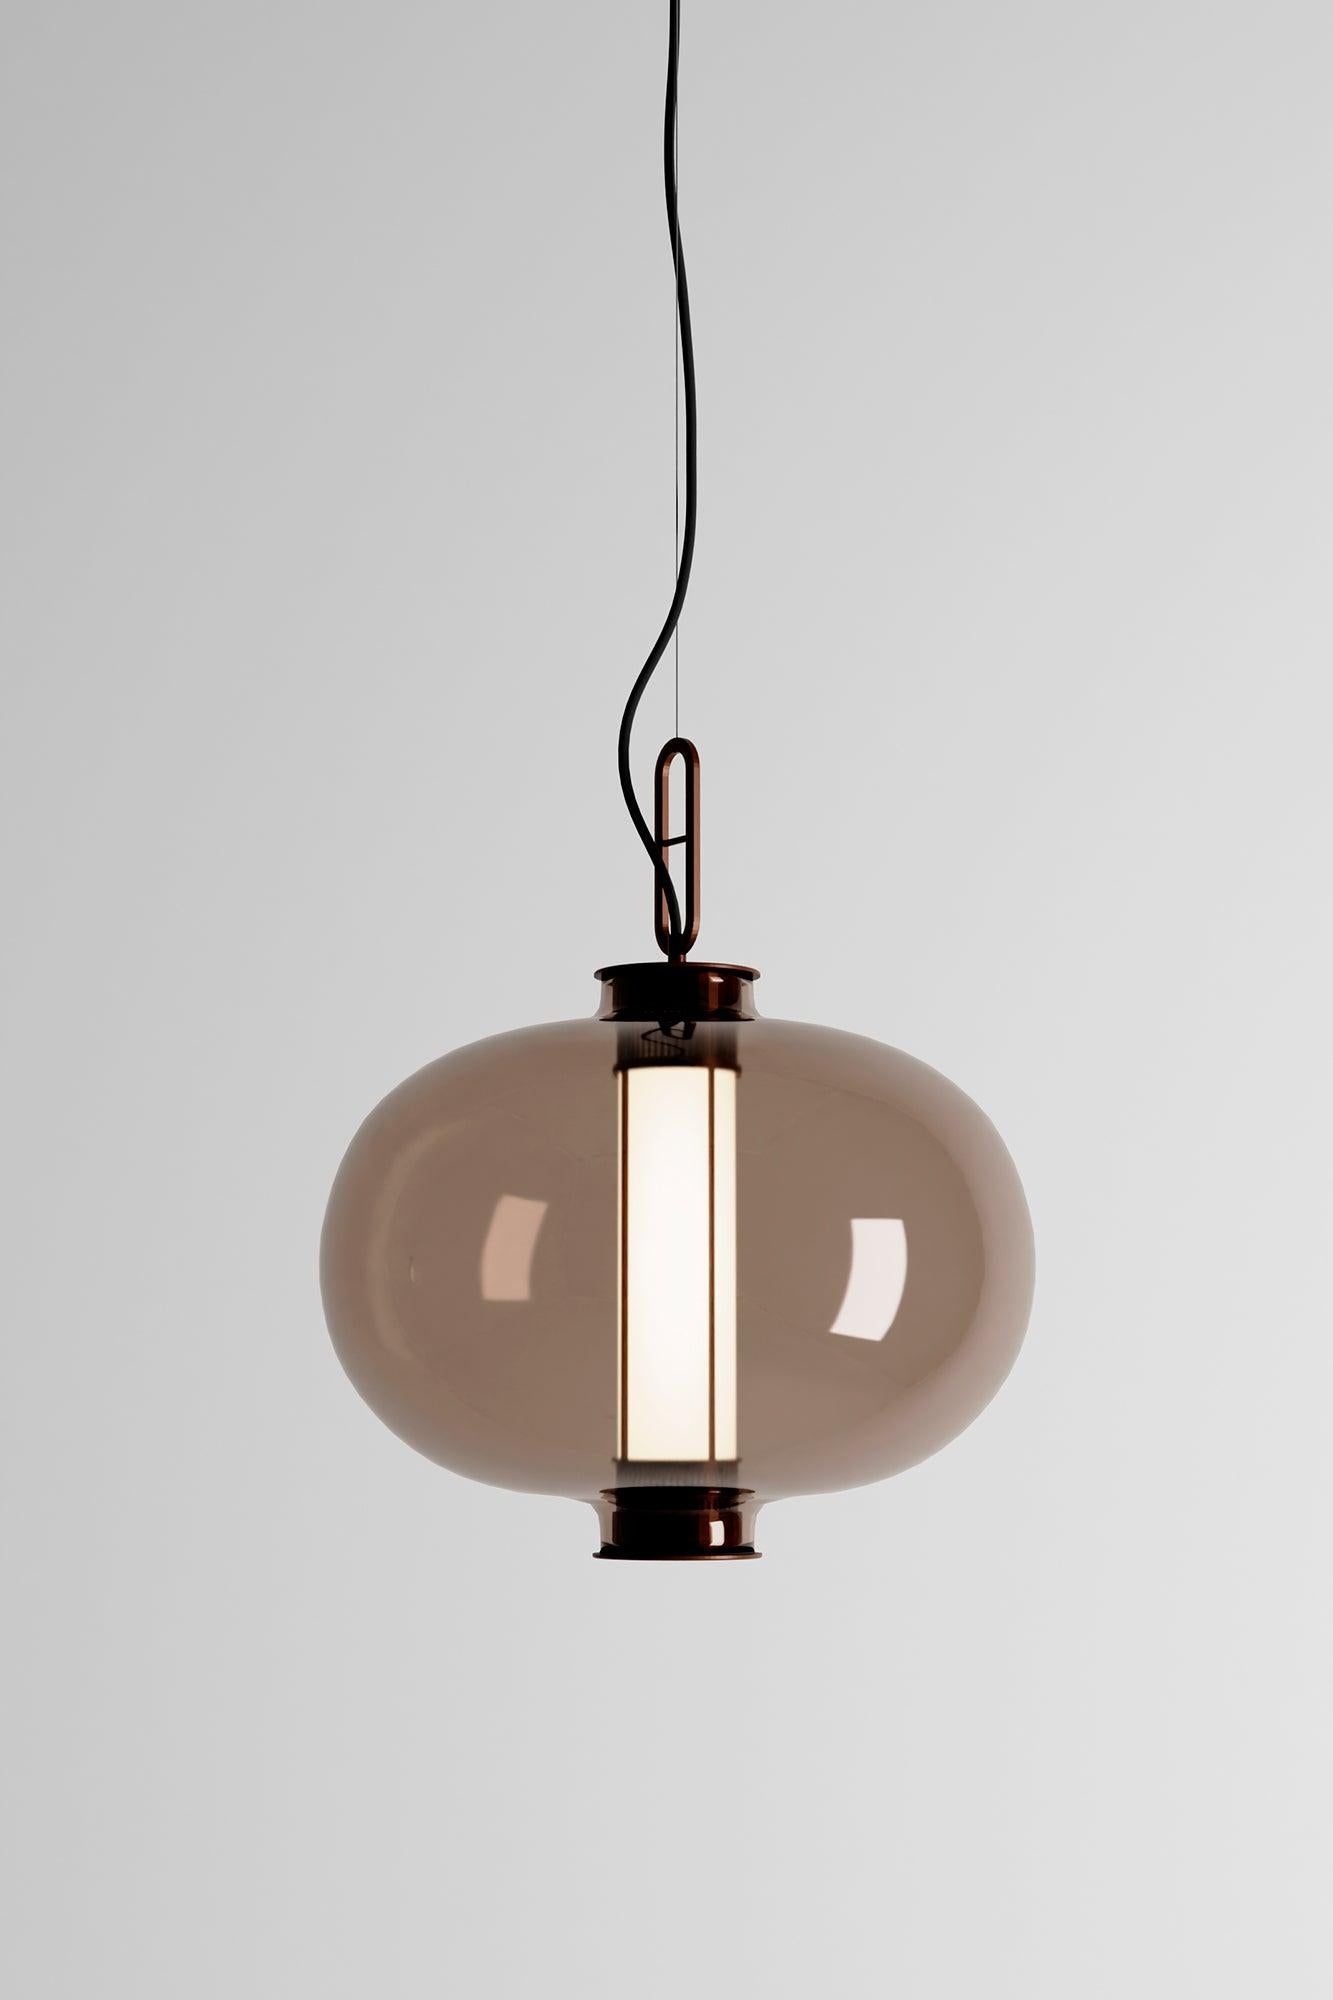 BAI T MA MA 

Suspension lamp, model BAI T MA MA, designed by Neri & Hu in 2014. 
Manufactured by Parachilna. 

This collection is inspired by traditional Chinese lanterns. This version however, is a sophisticated one. Made of an aged bronze